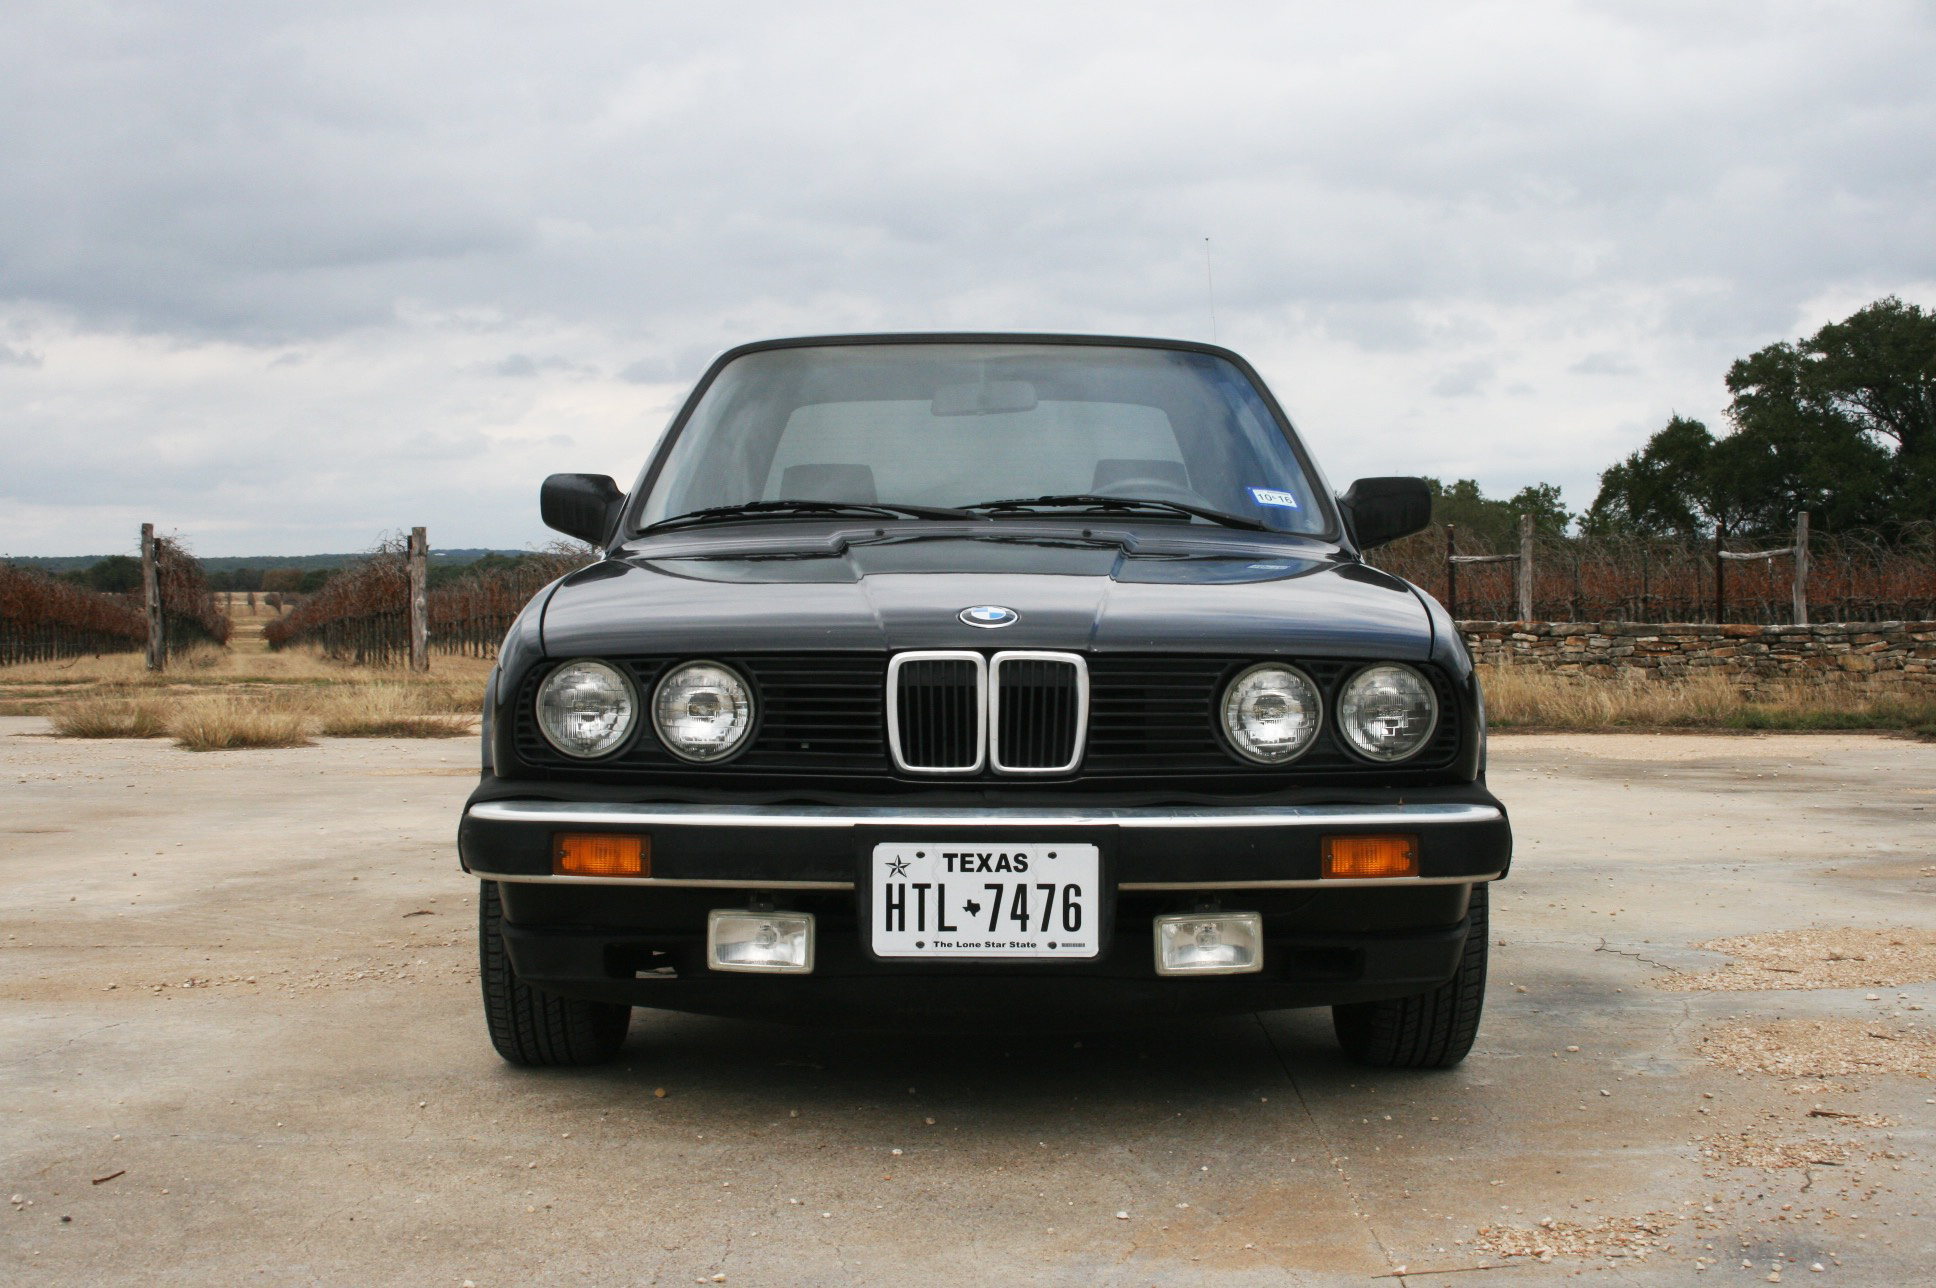 What It’s Like To Live With BMW’s Most Unloved Engine